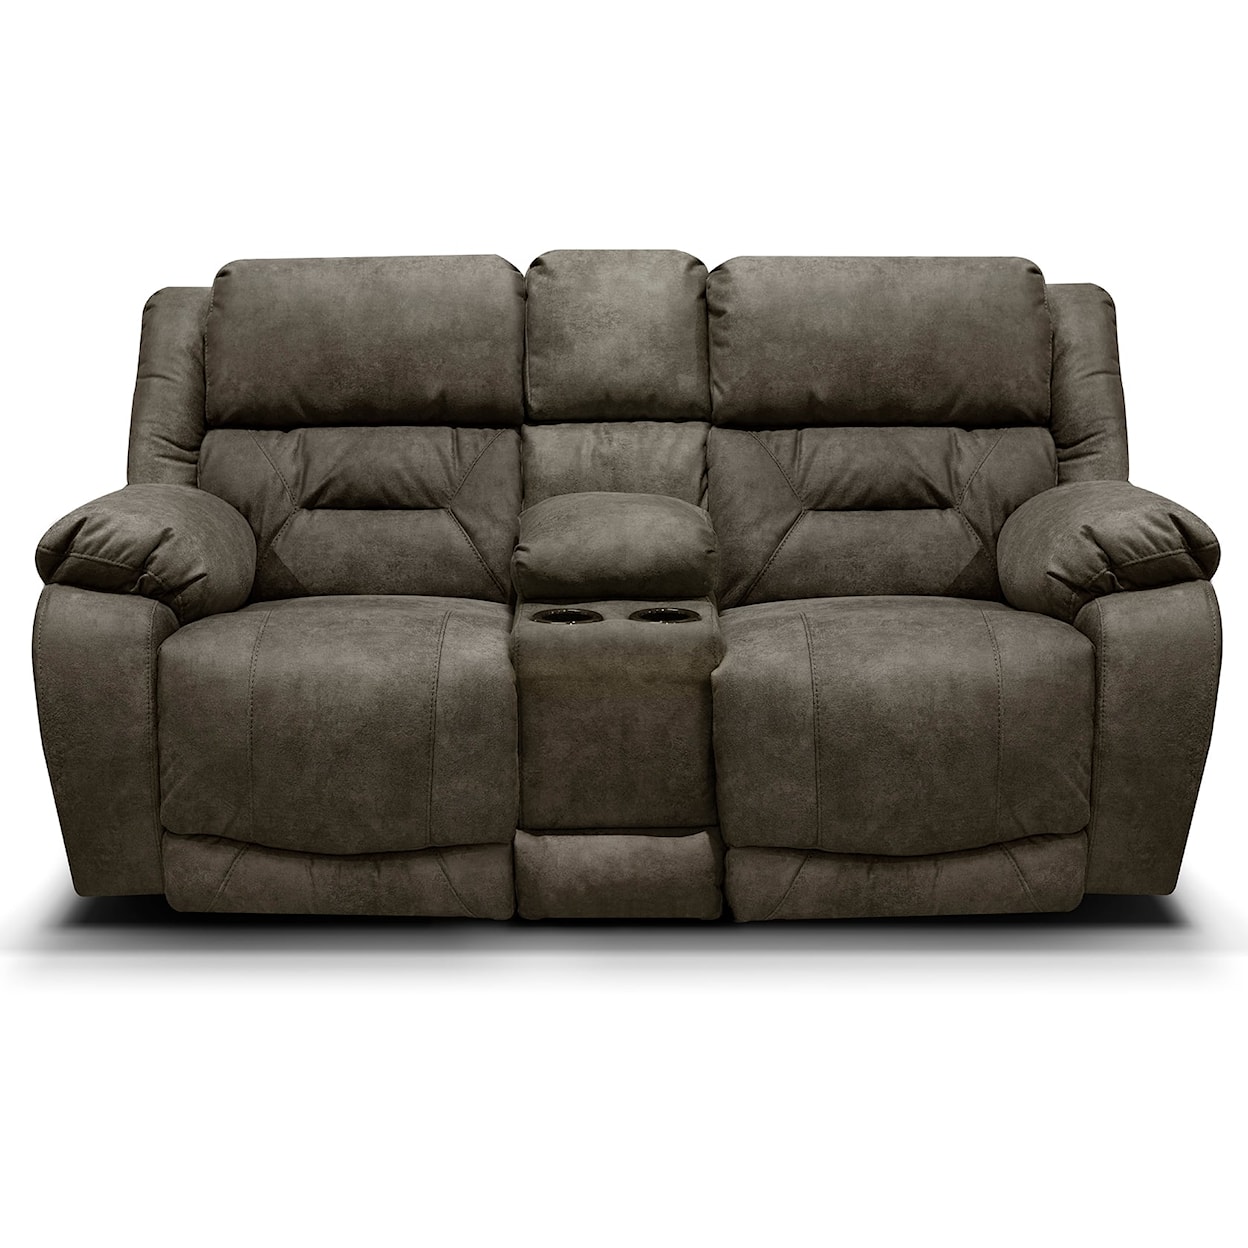 Tennessee Custom Upholstery EZ9B00/H Series Dual Reclining Loveseat with Console